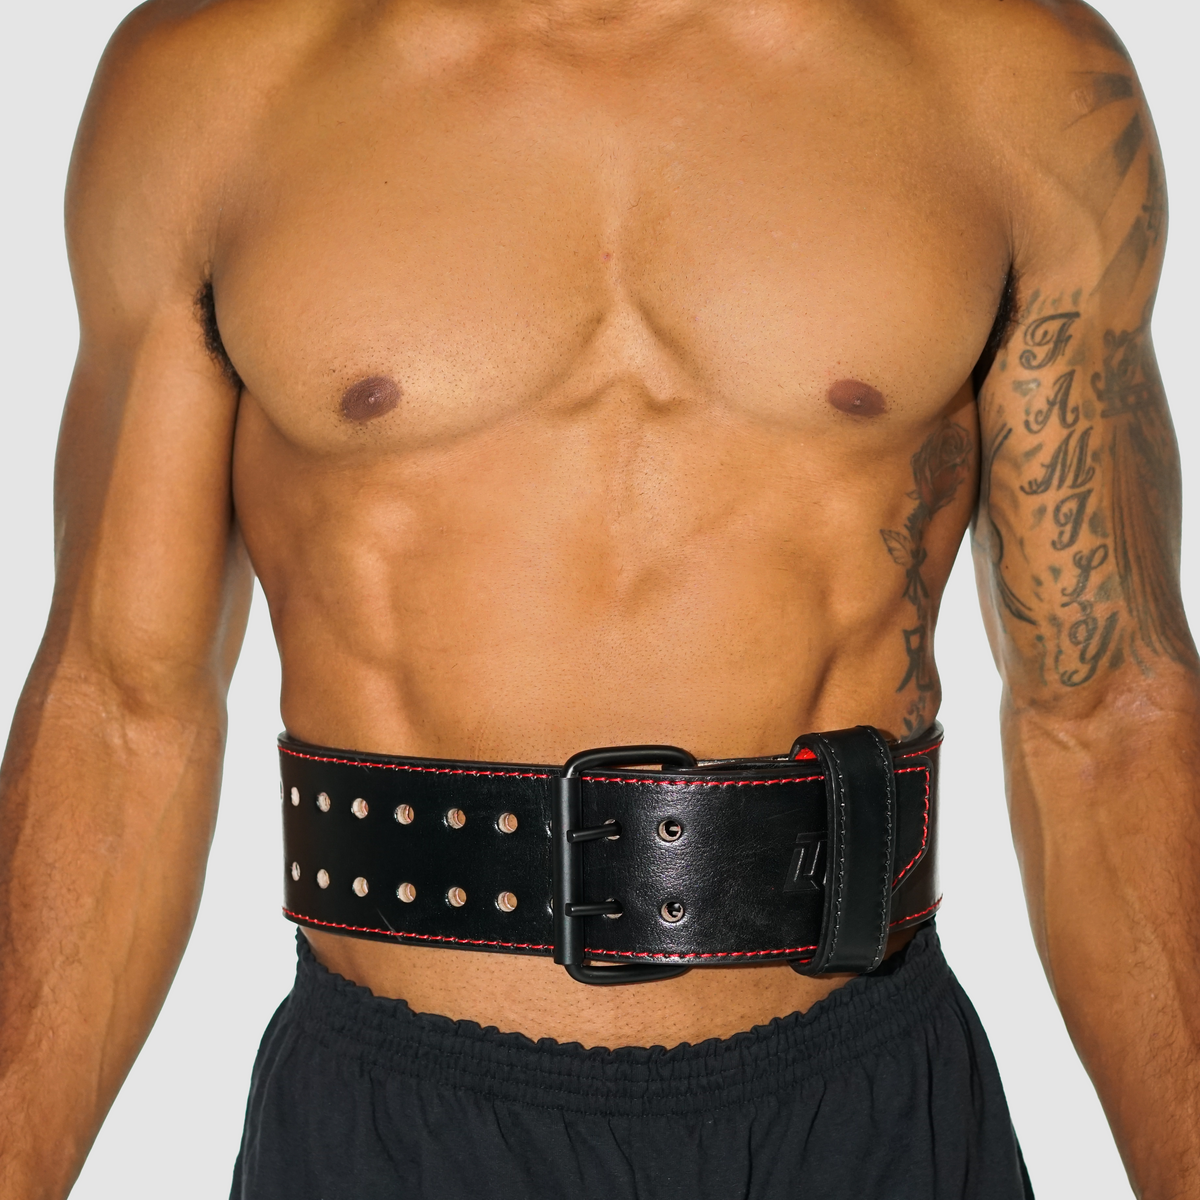 Leather Weight Lifting Belt for Men Gym Workout equipment sport accessories  NEW